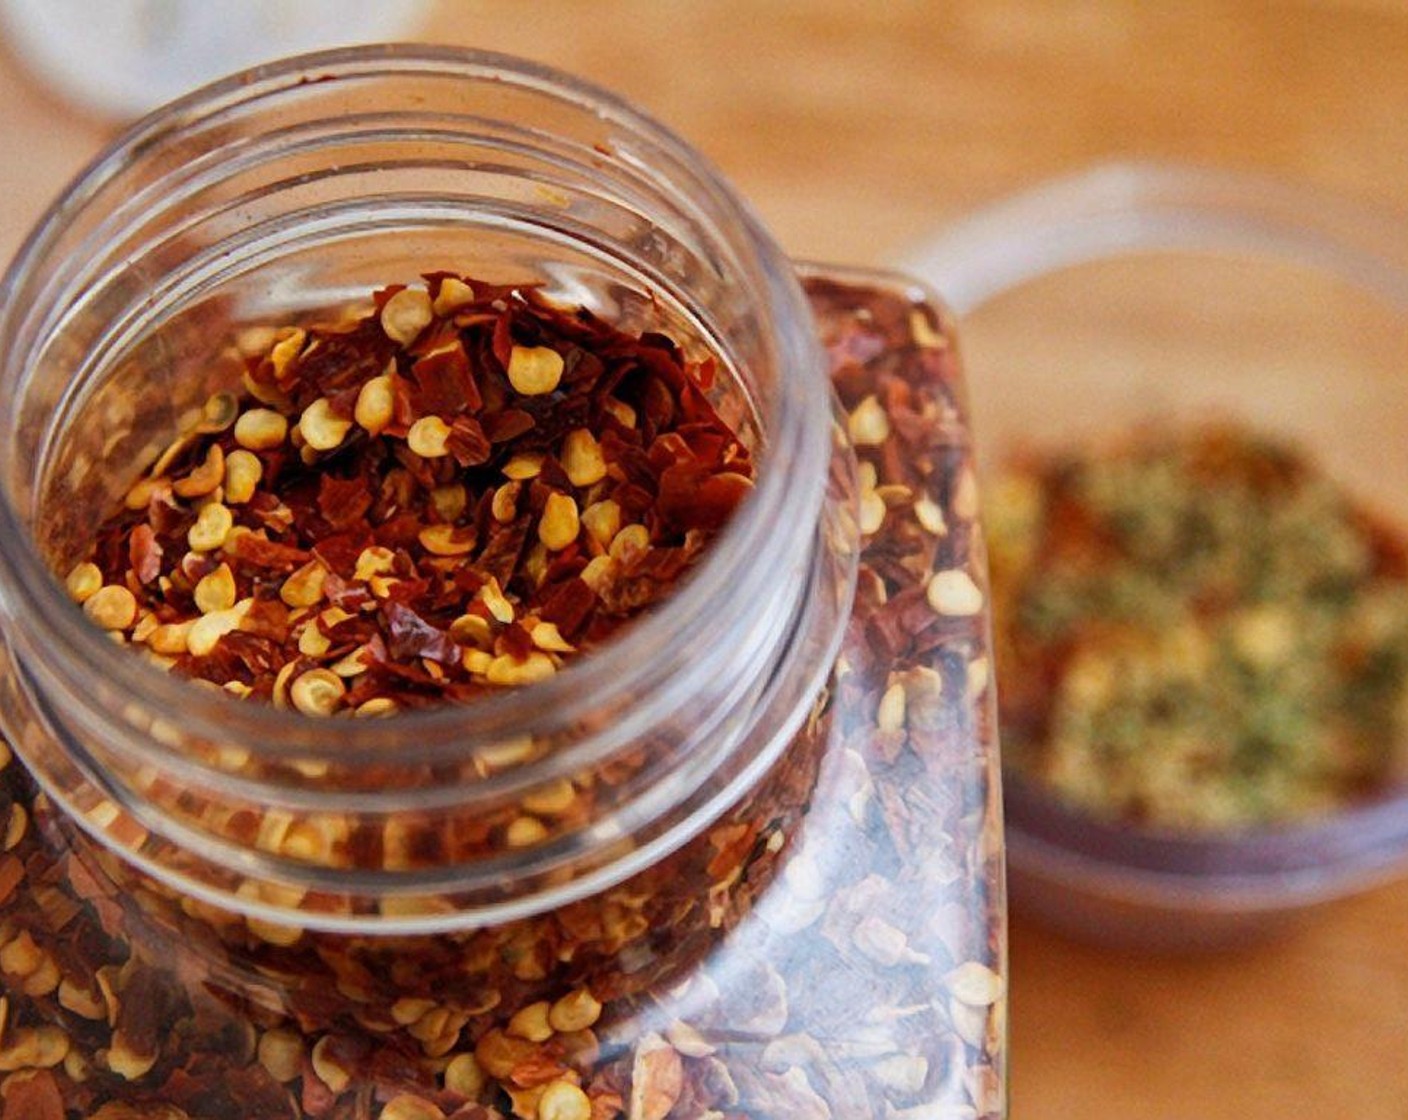 step 8 Add in Crushed Red Pepper Flakes (1/2 tsp), they'll add a spicy kick!